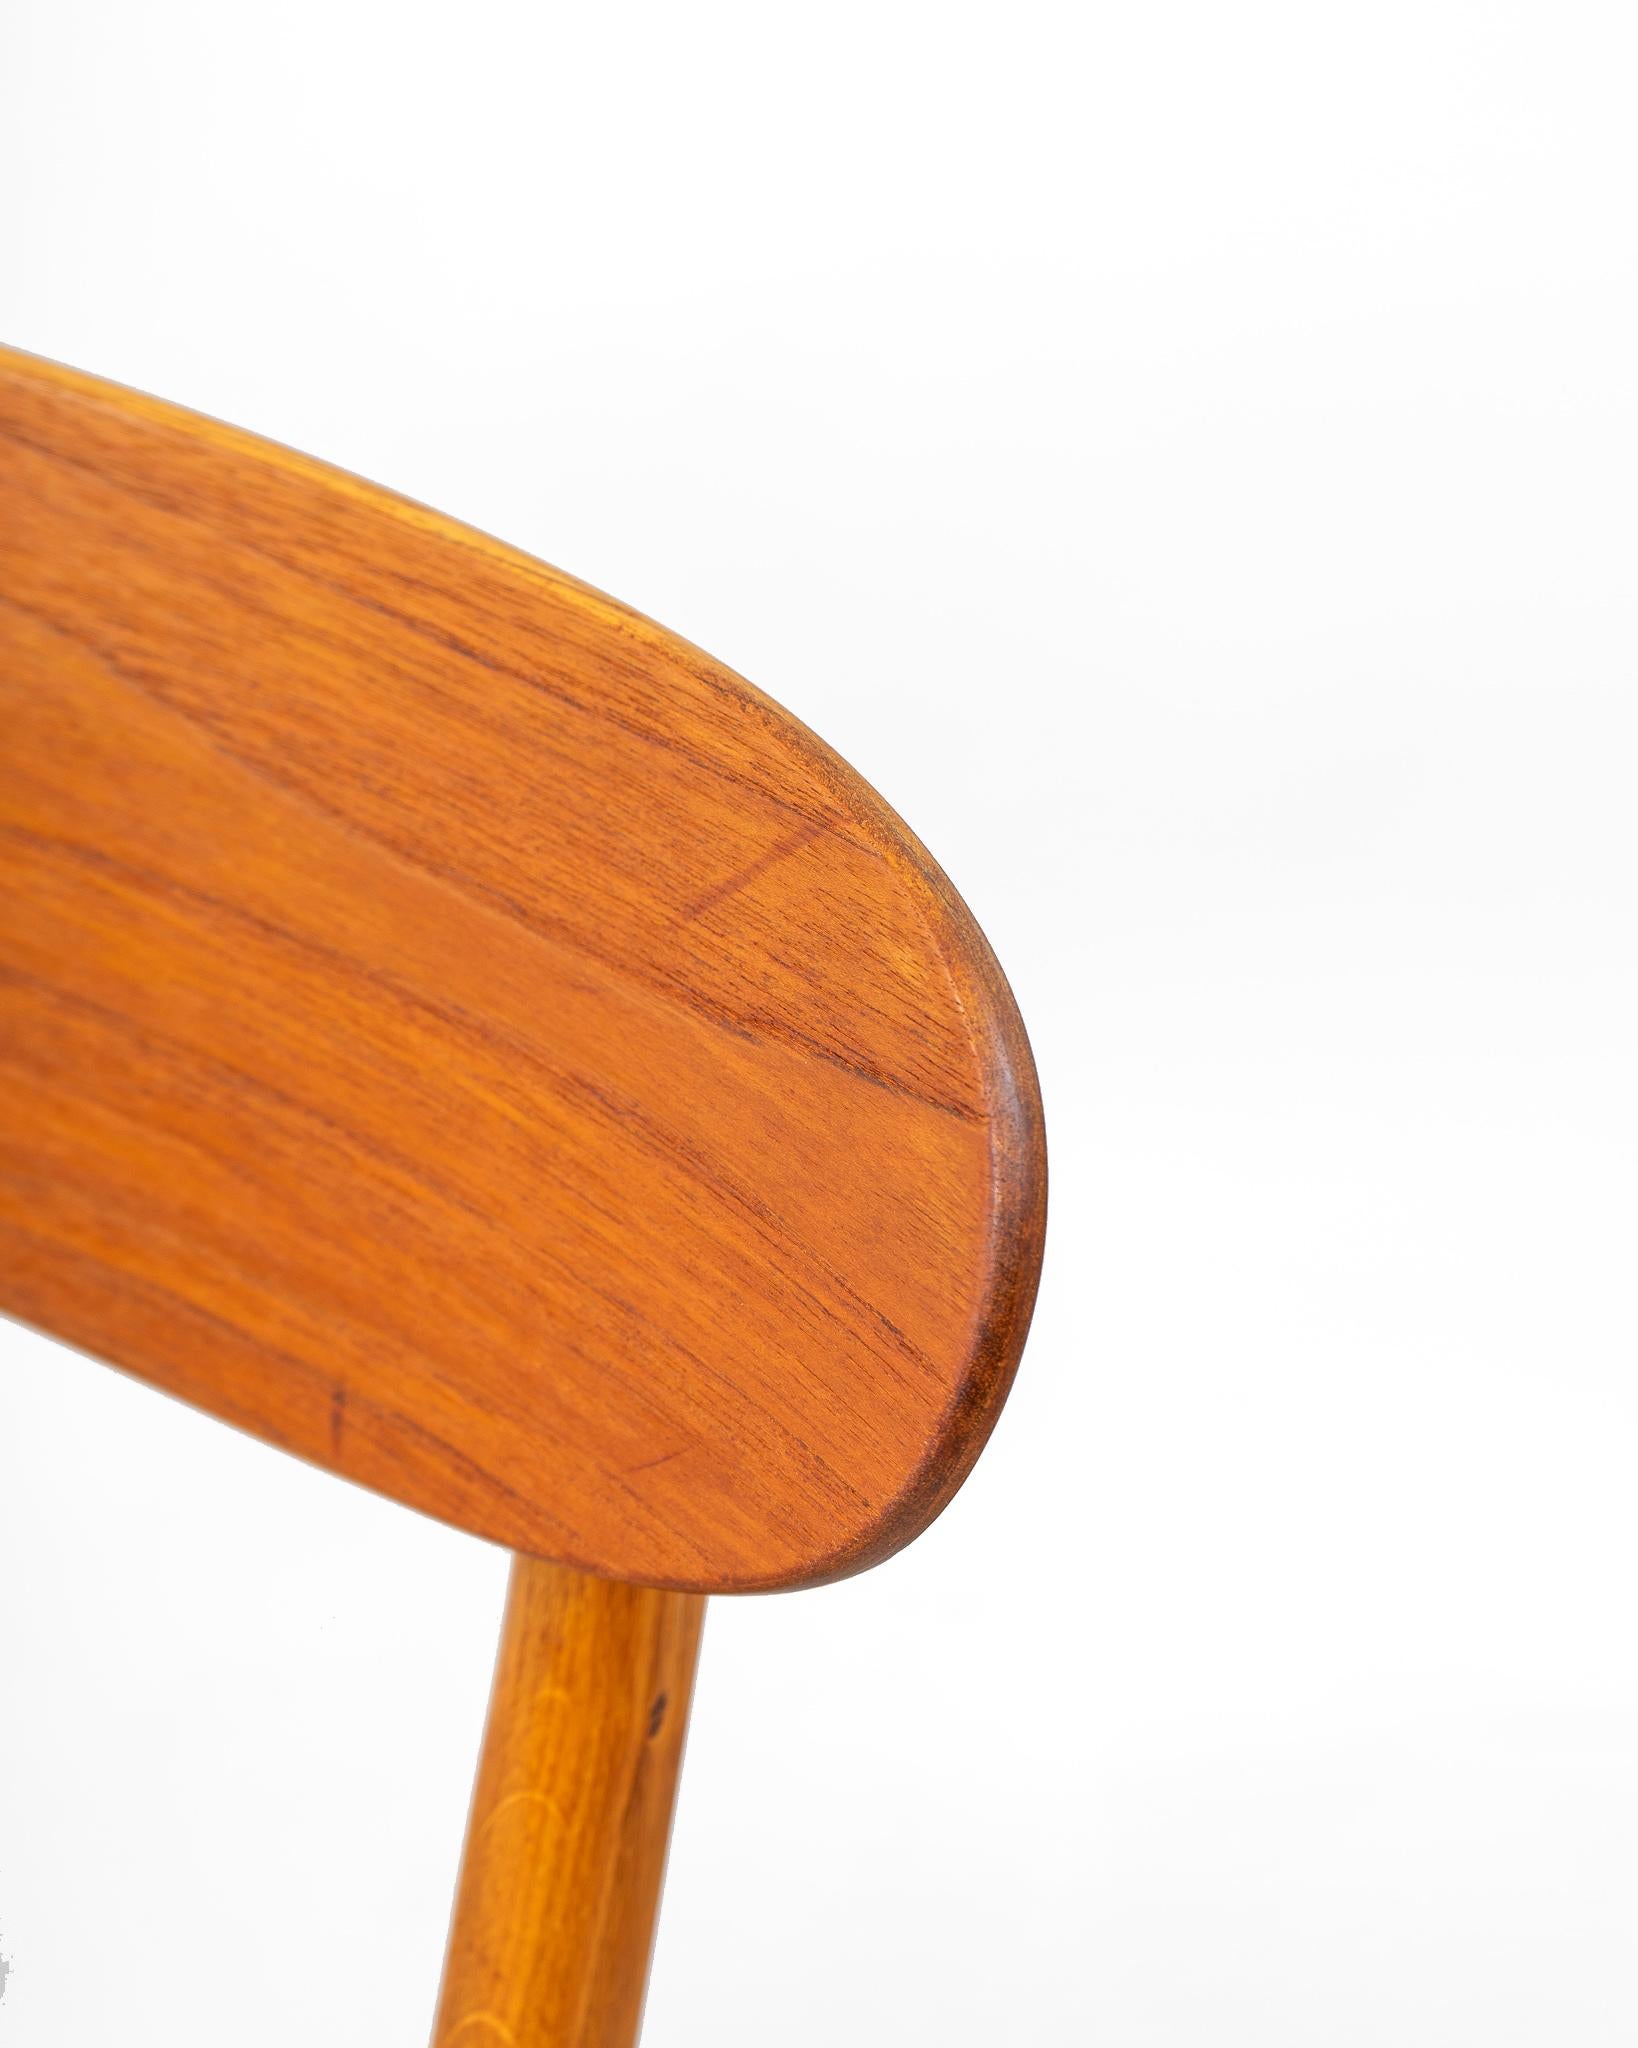 Pair of Danish Chairs Made of Teak, circa 1960 For Sale 2